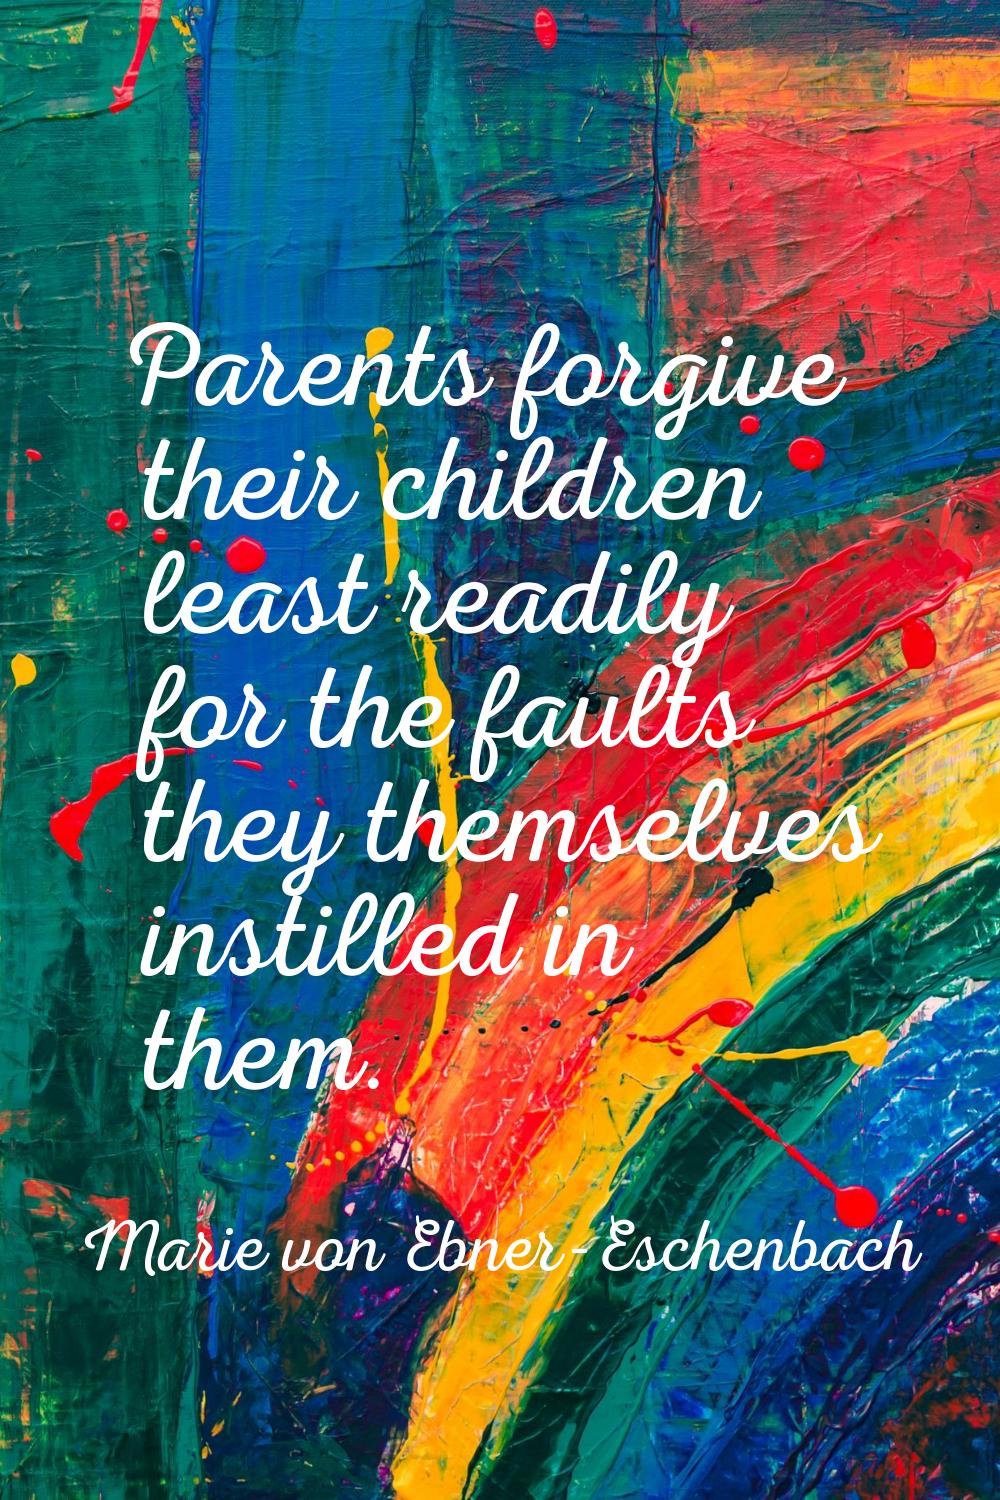 Parents forgive their children least readily for the faults they themselves instilled in them.